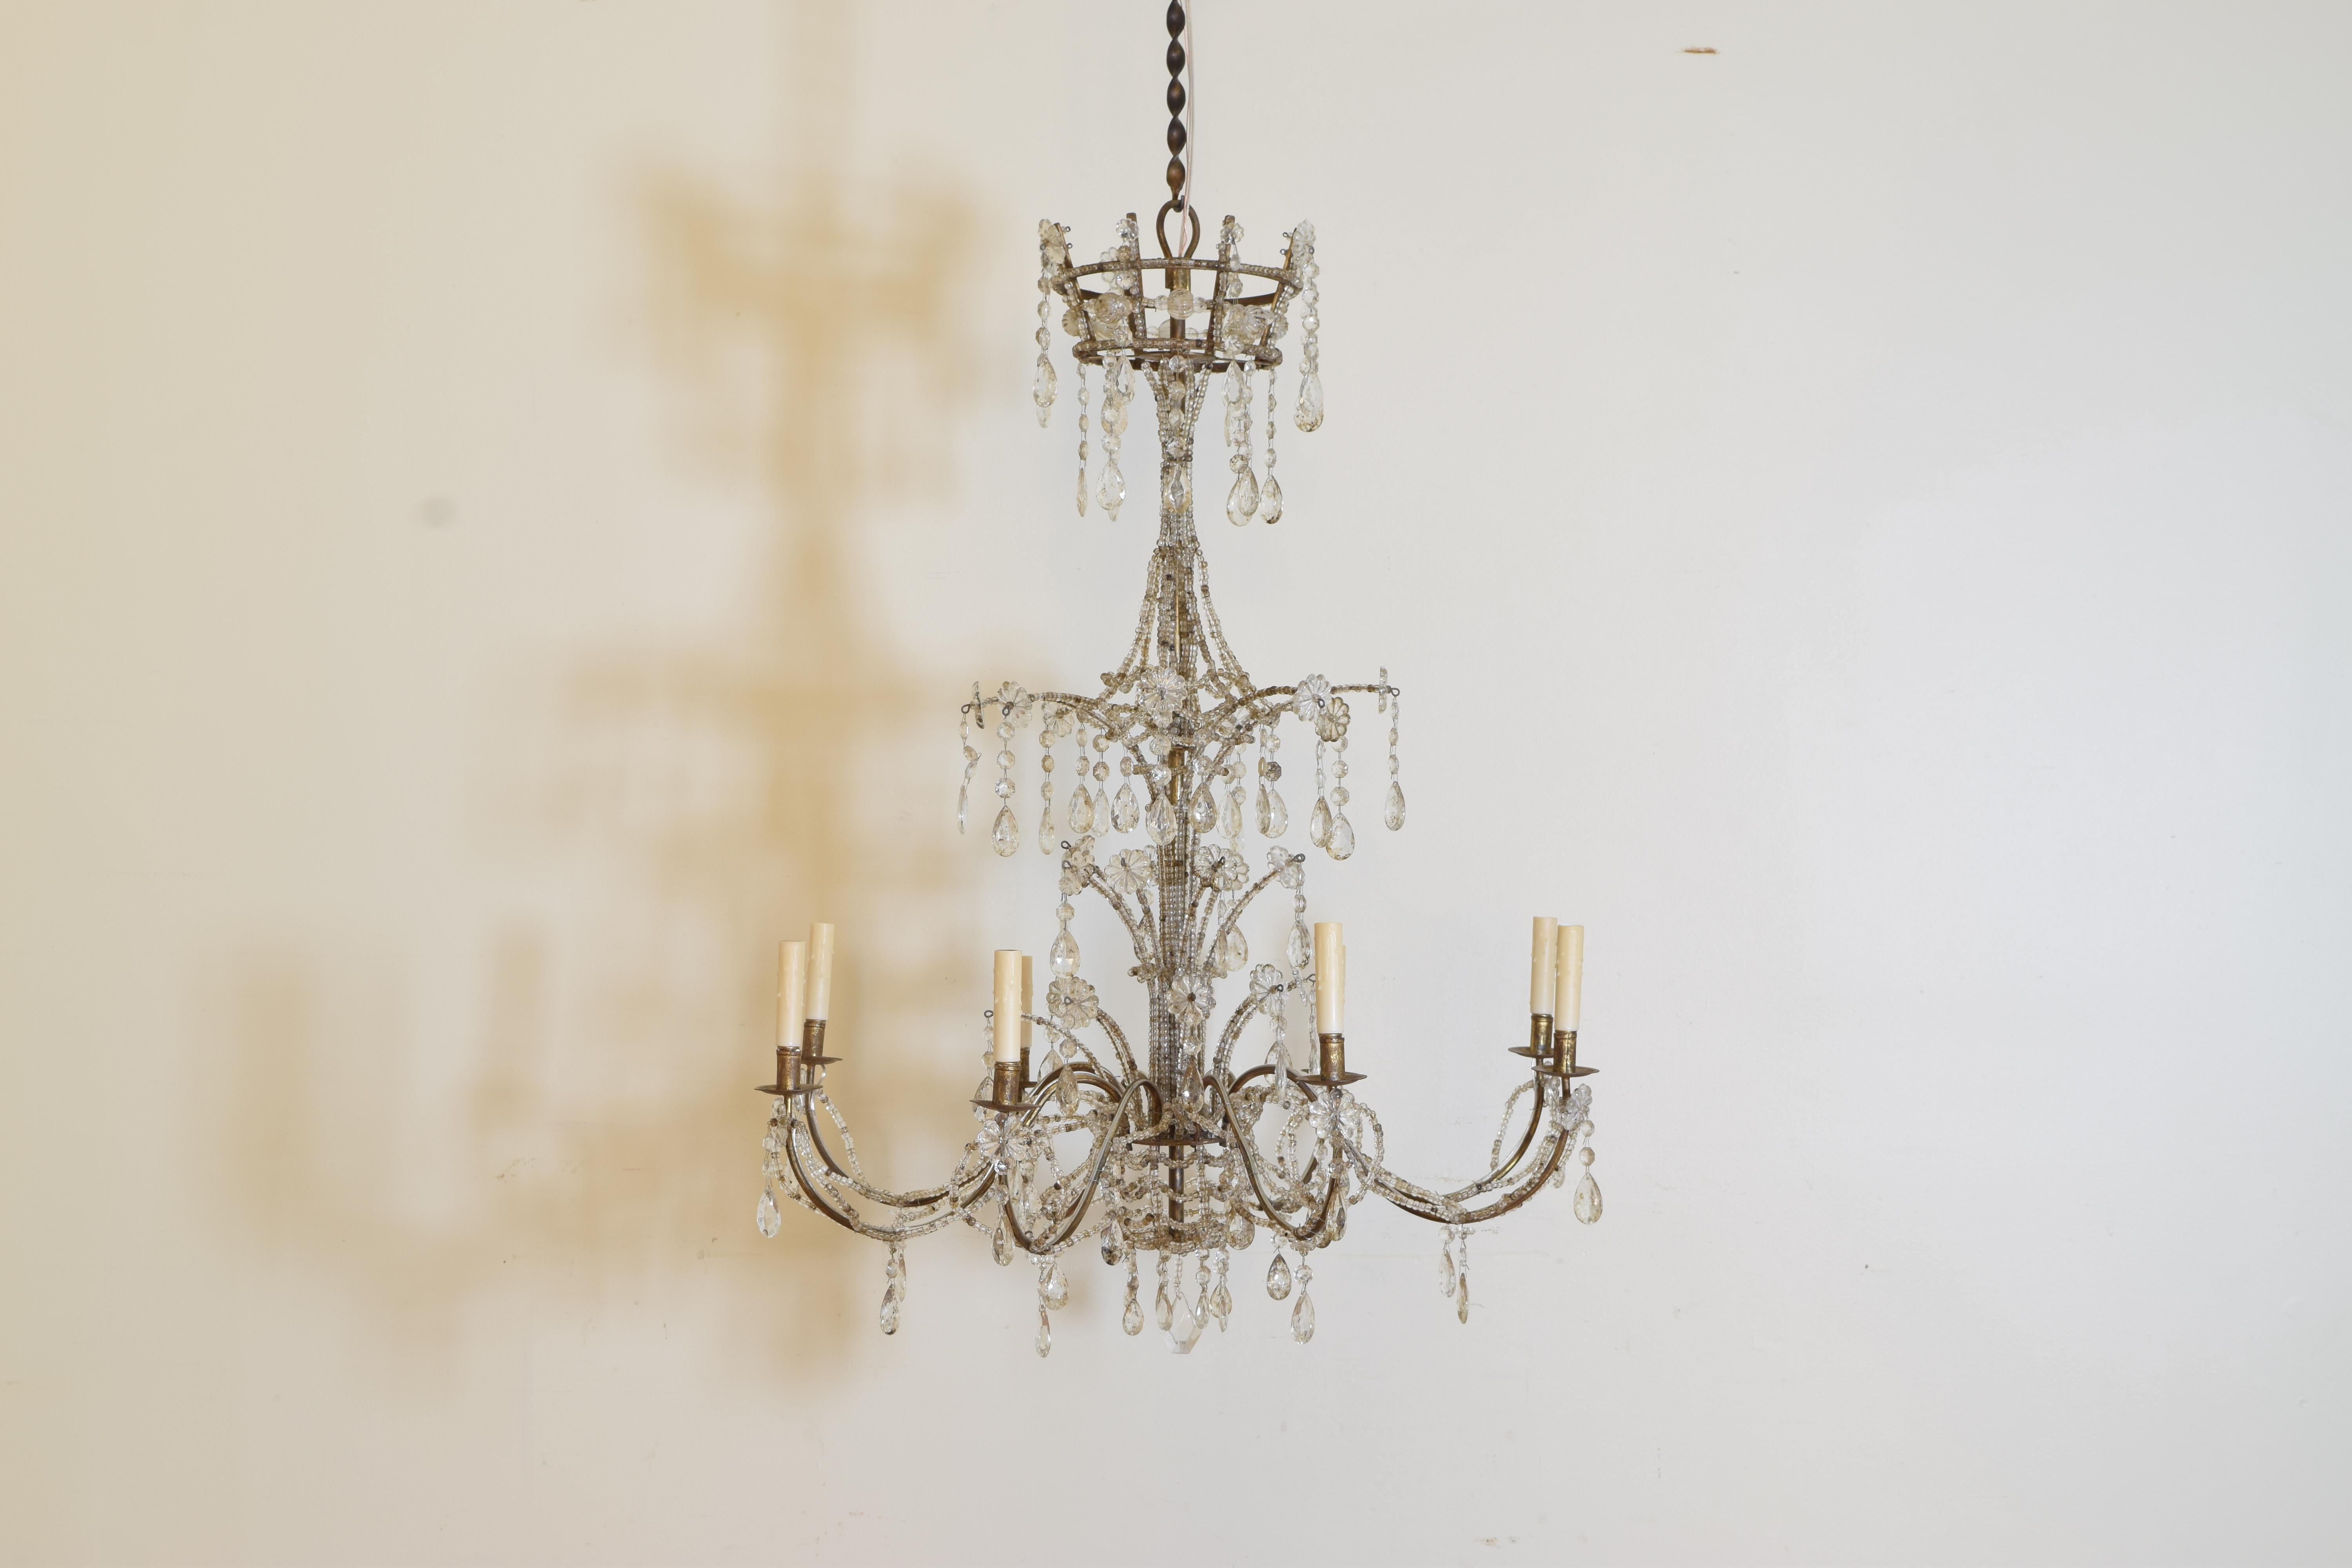 A highly stylish pair of Mid Century Genovese chandeliers having a cage form top above standard issuing arms with faceted prisms, the body of the chandelier covered in tight glass bead chain.